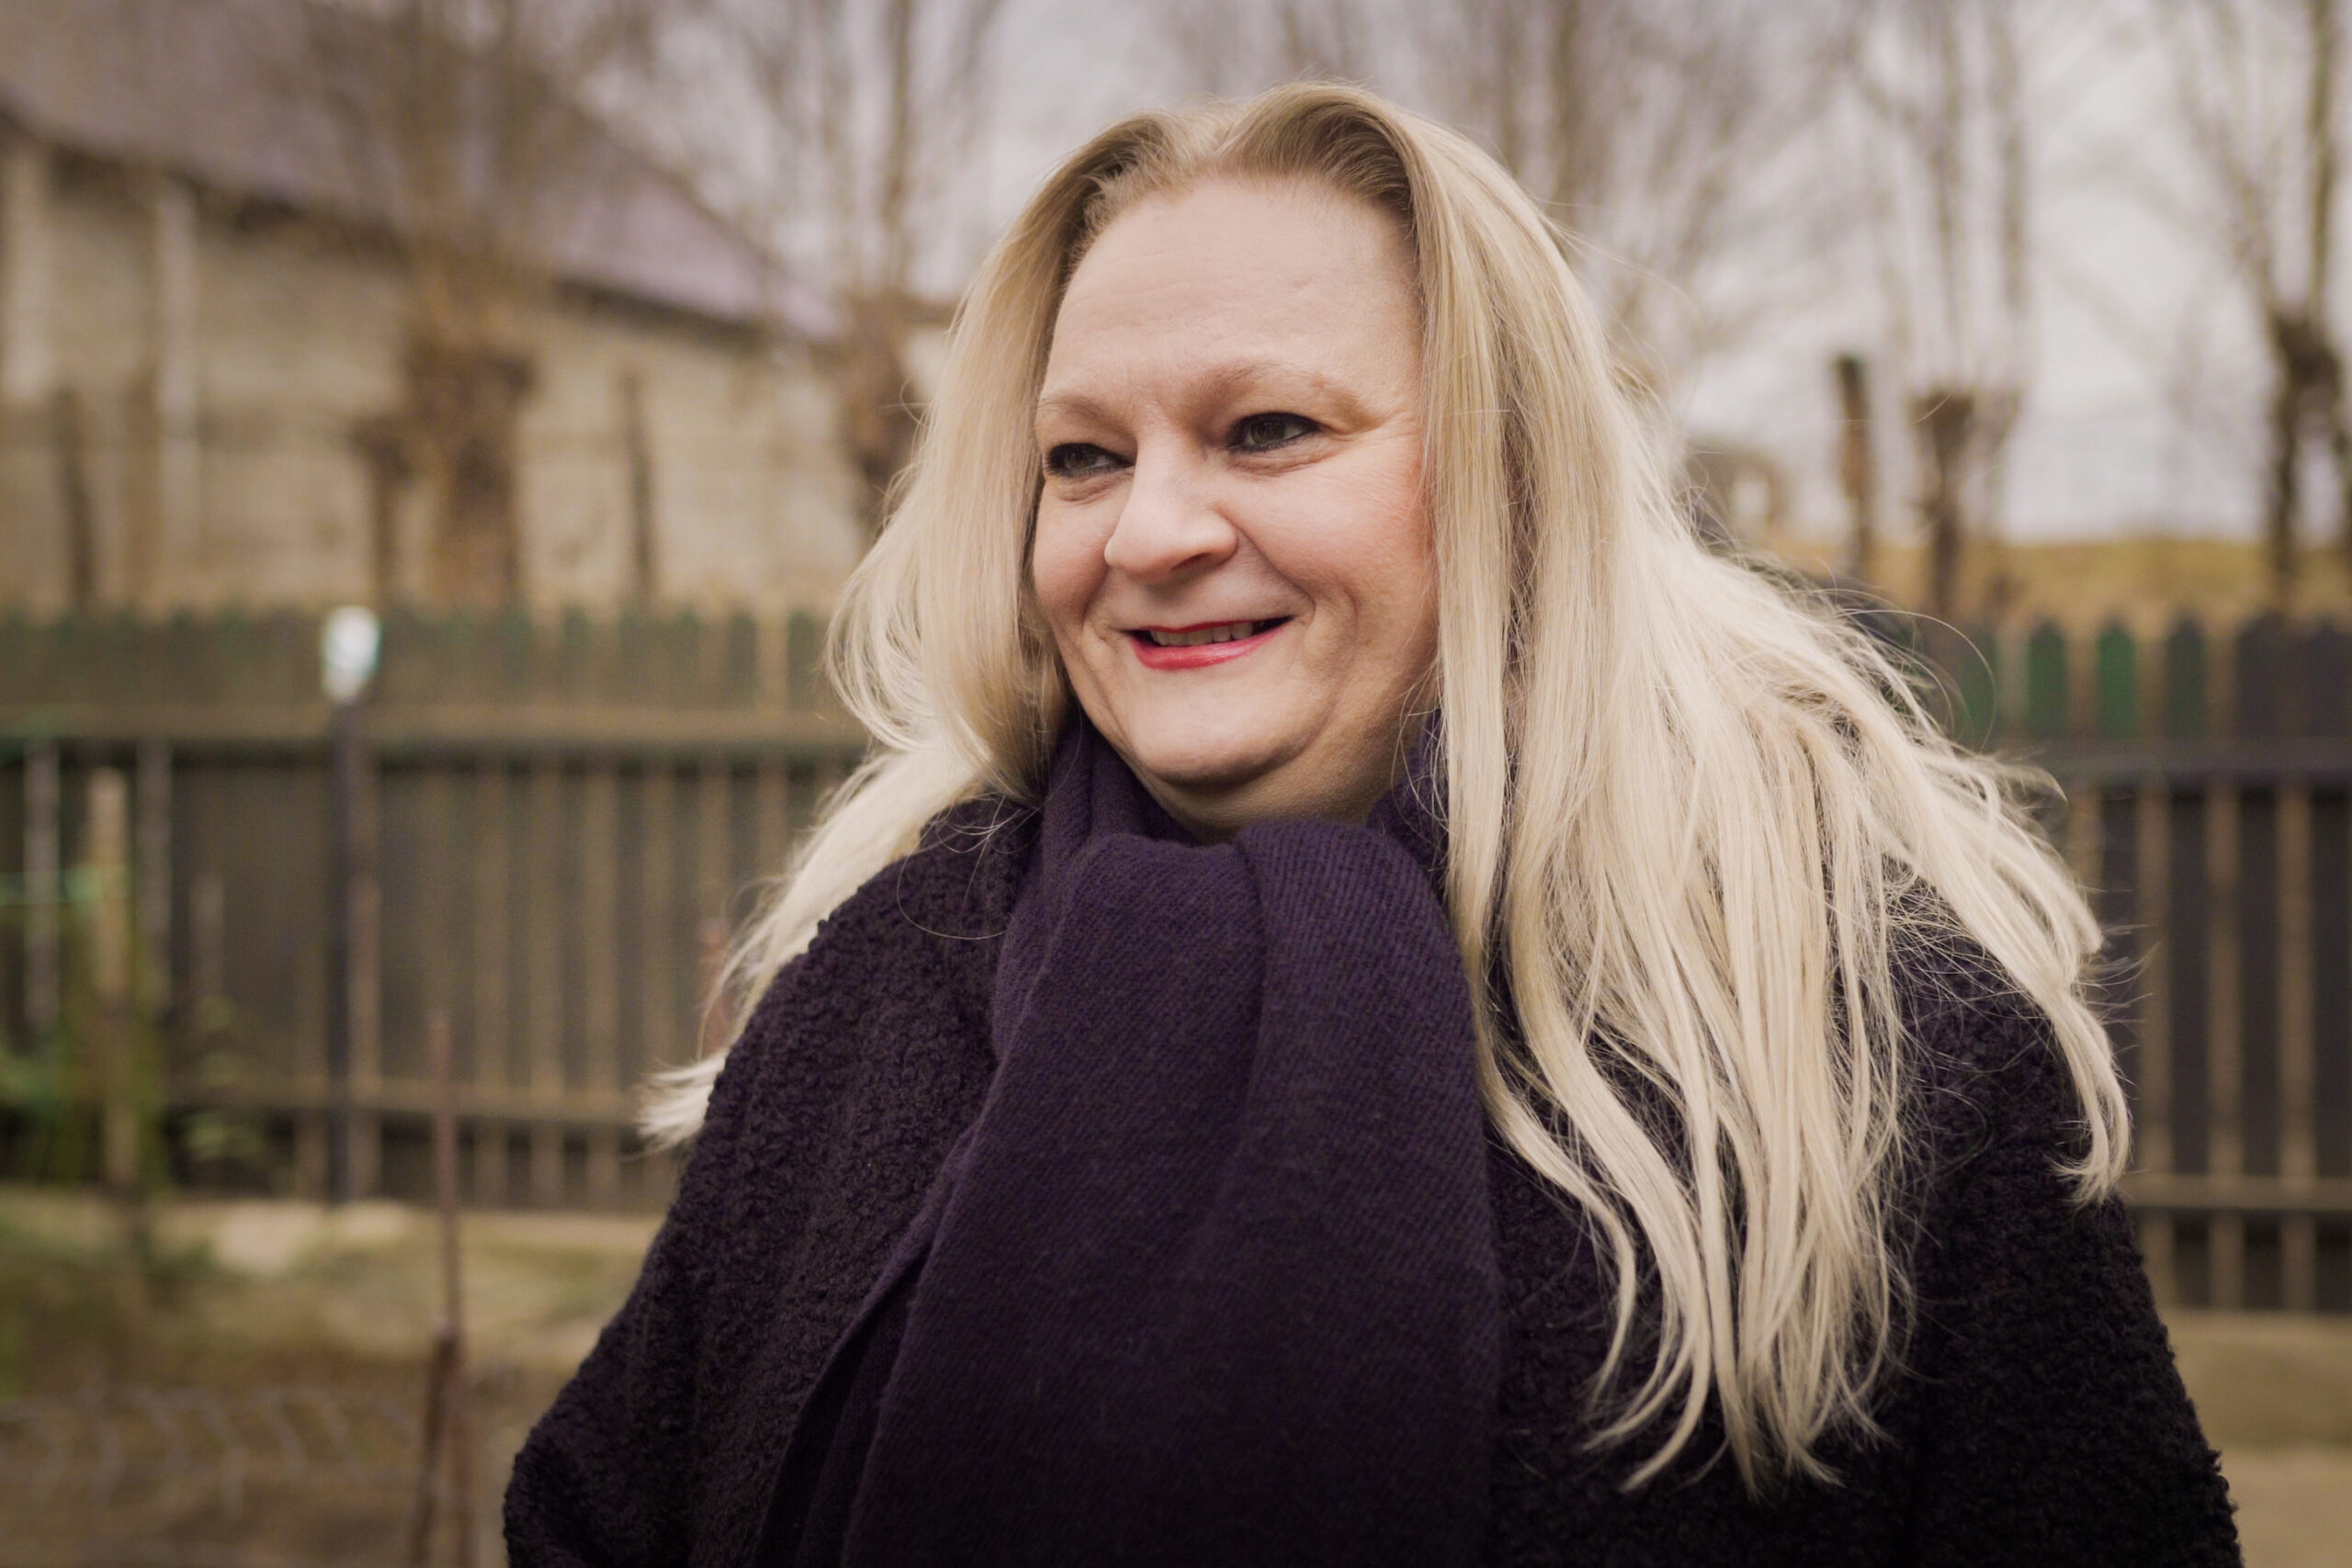 A middle aged white Romanian woman with long blonde hair standing up and smiling in a warm black coat and scarf. She's outside in front of a wooden fence on a dull winter day.